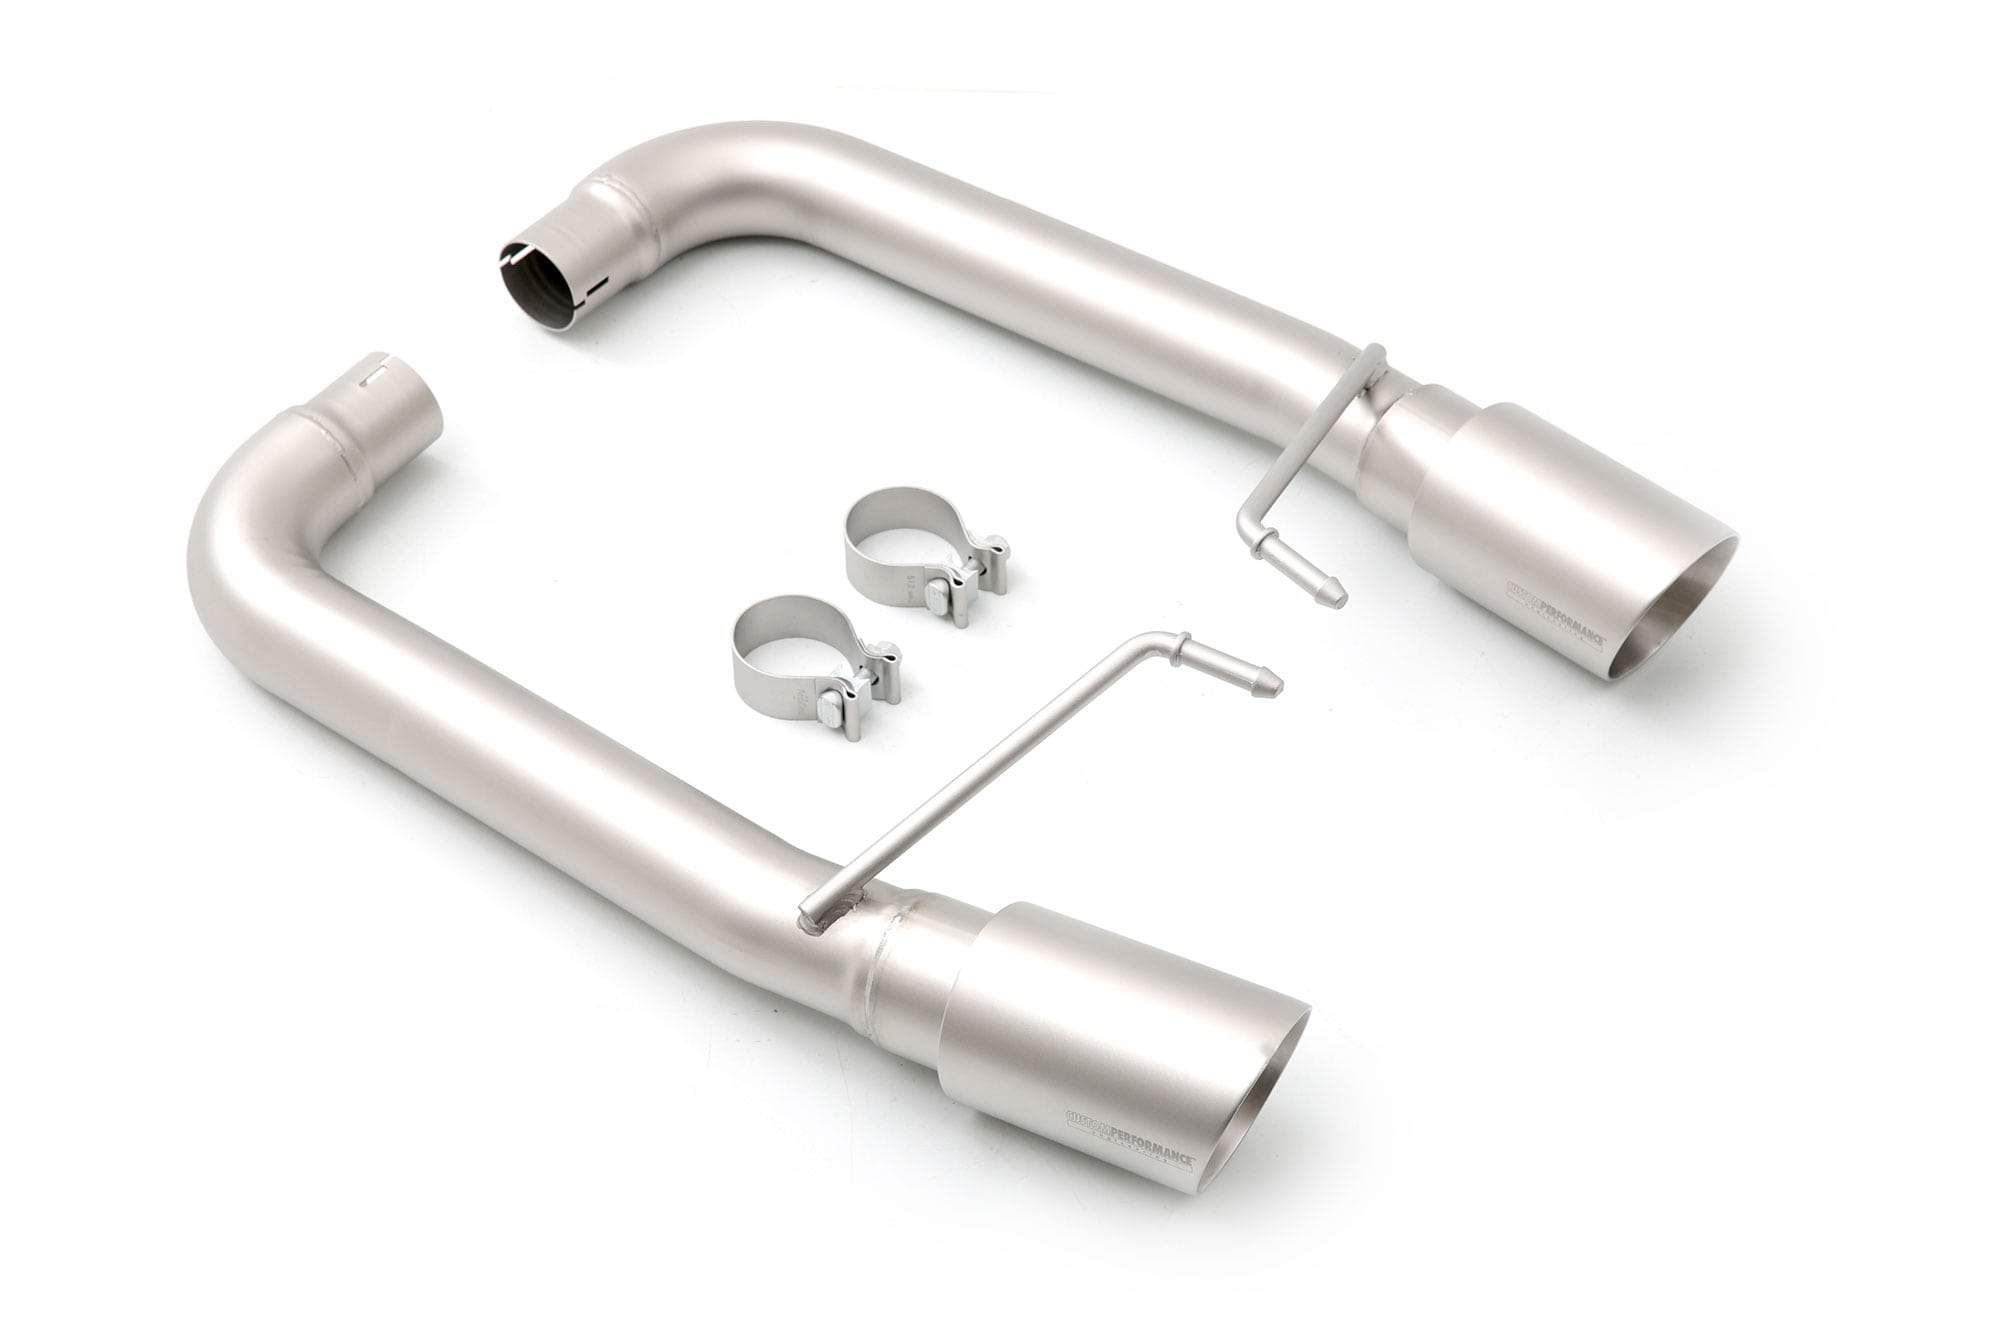 cp-e Austenitowy Ford Mustang EcoBoost Tłumik Usuń Axle Back System wydechowy